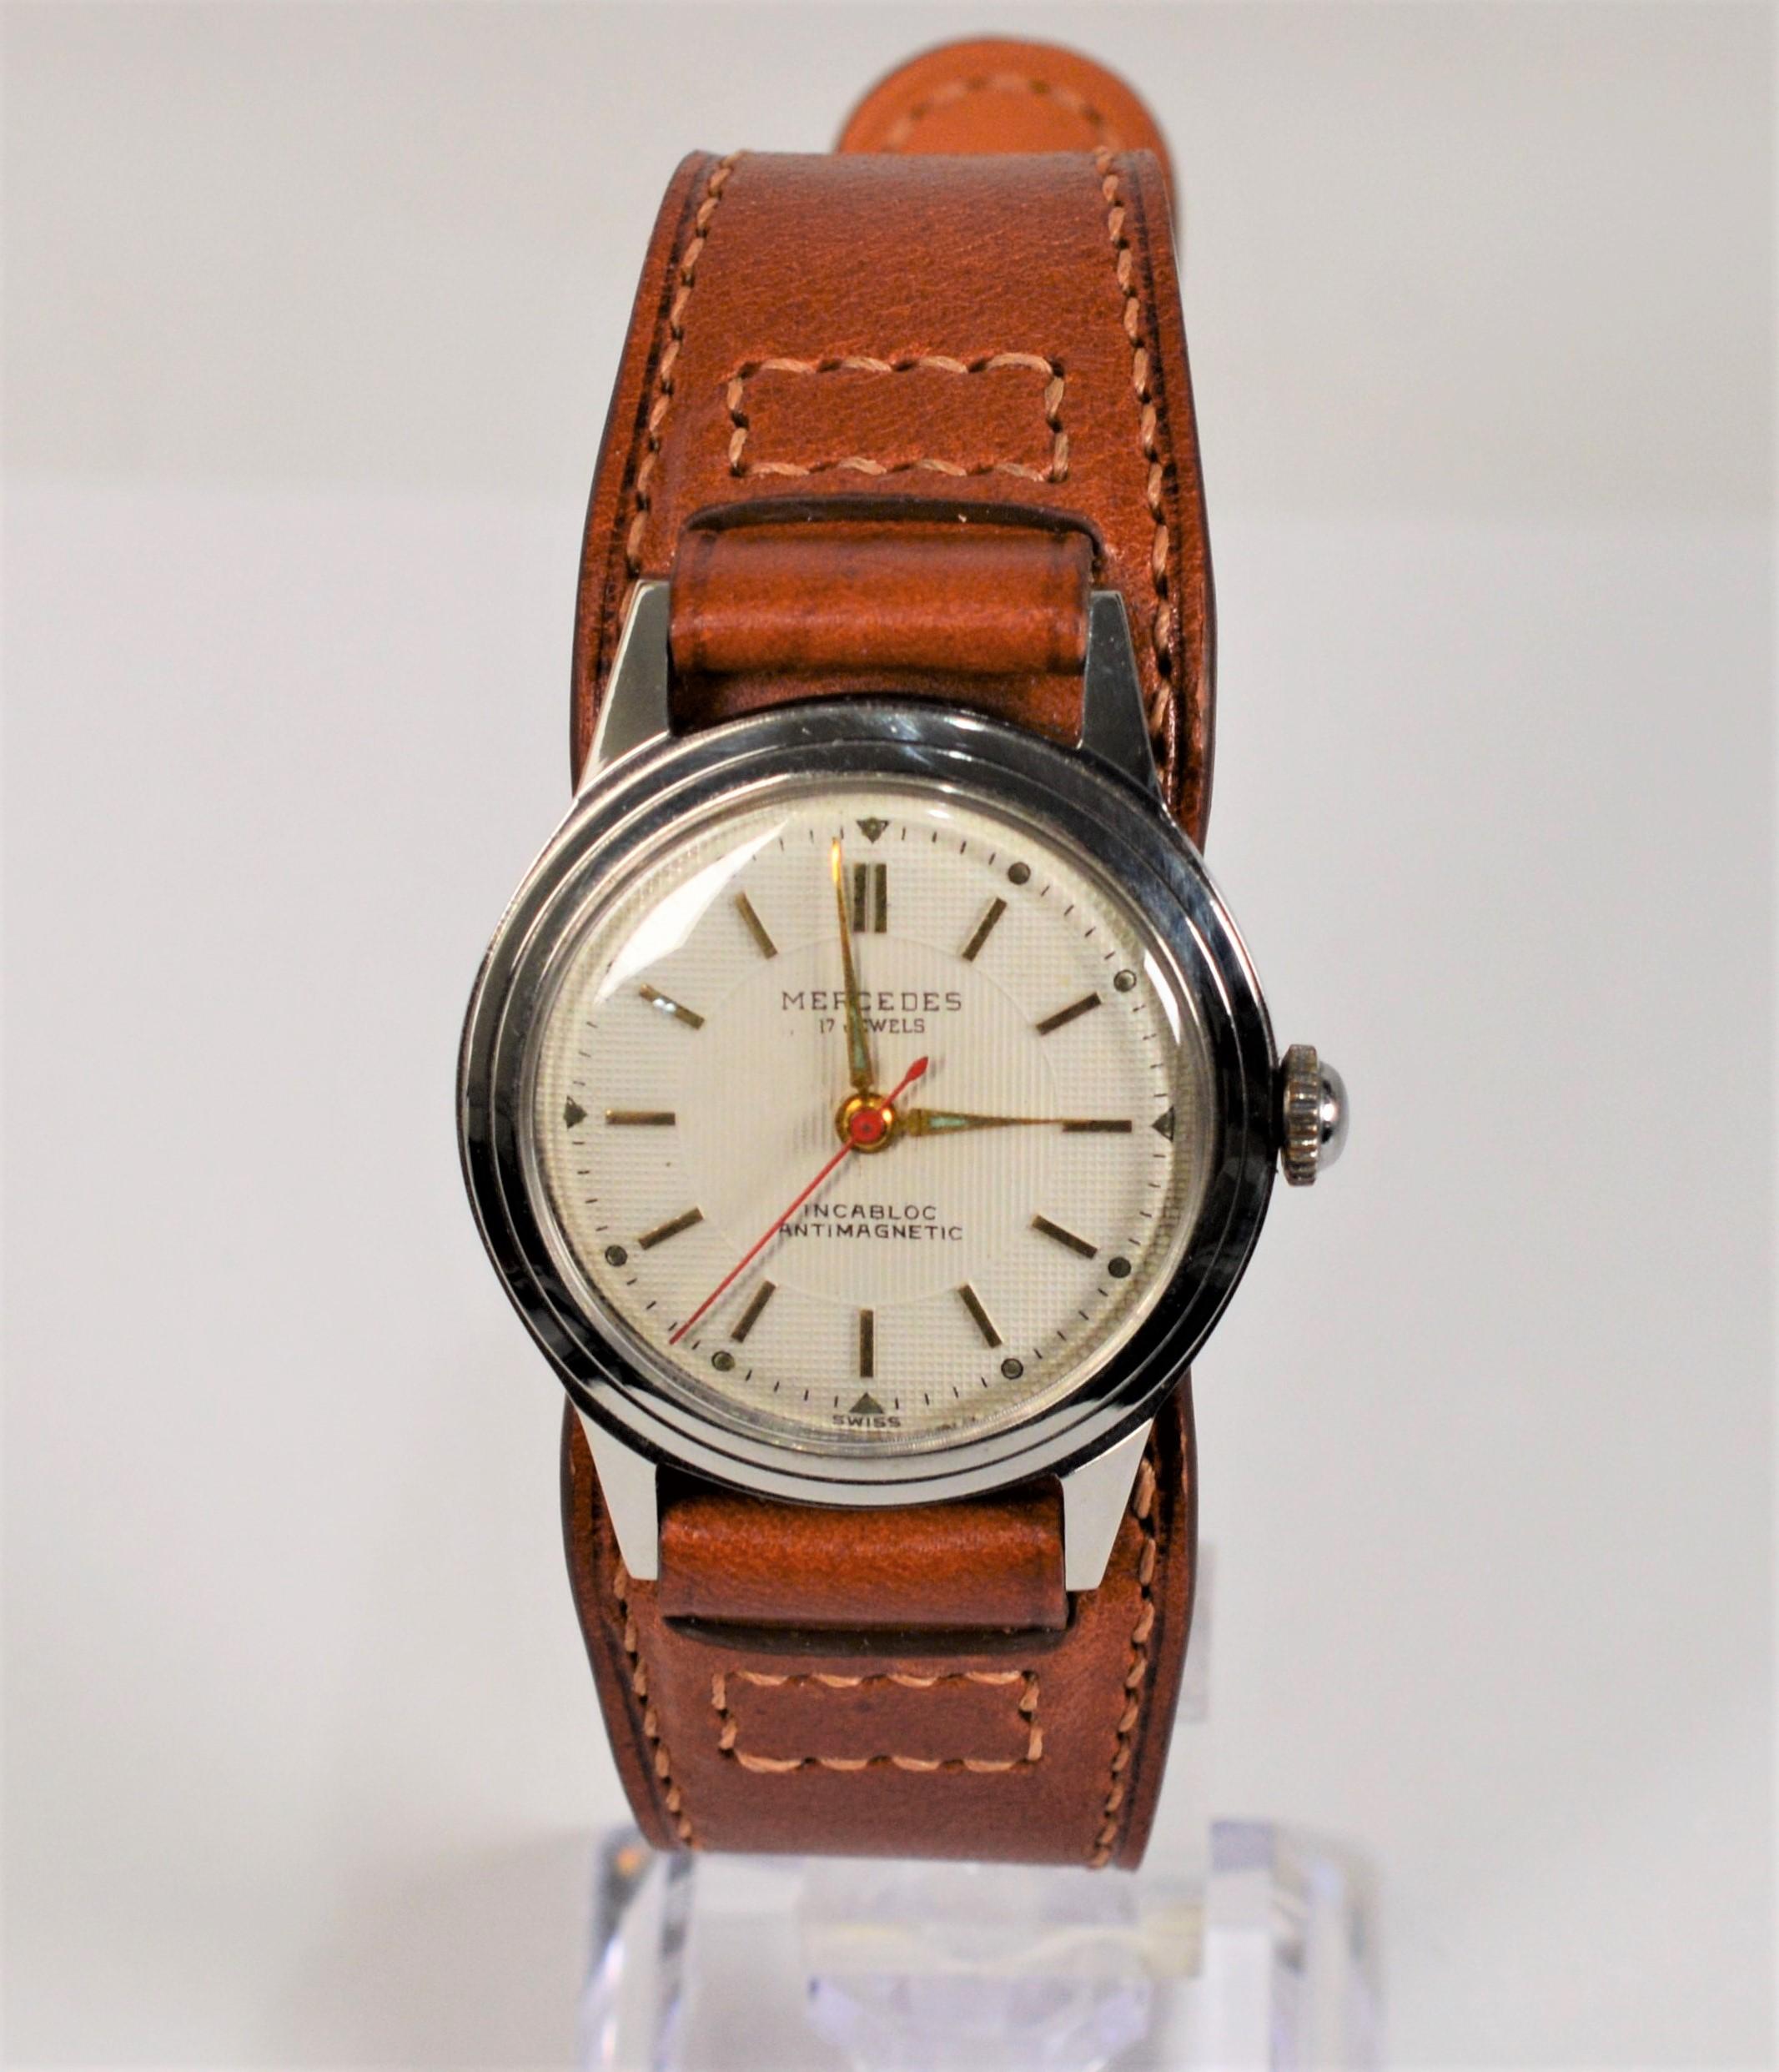 Mercedes Stainless Steel Post WWII Vintage Wrist Watch For Sale 2